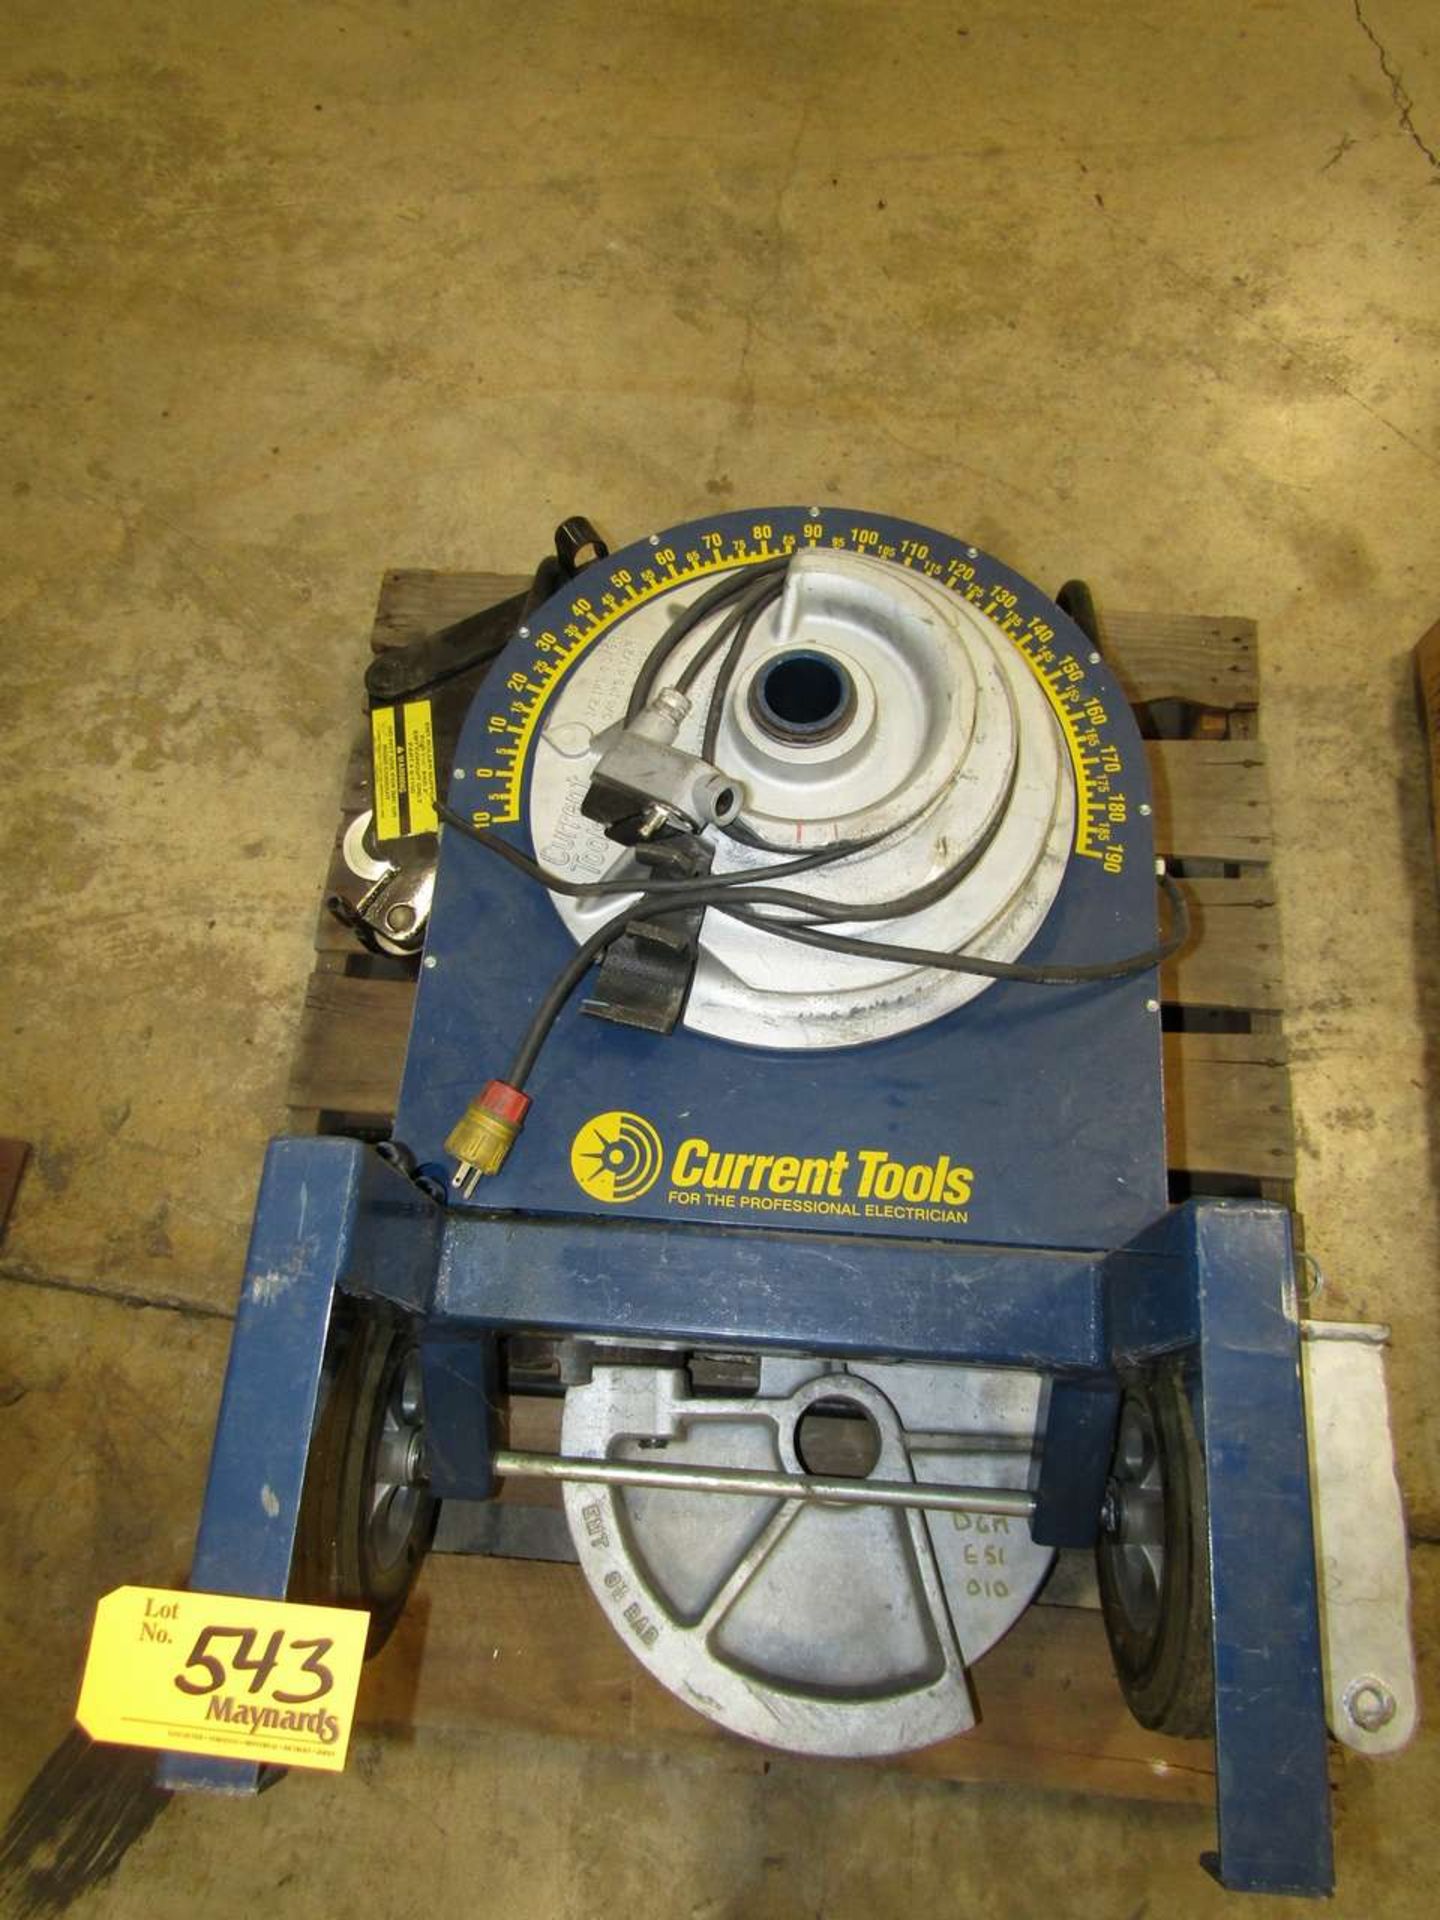 Current Tools 77 Electrical Conduit Bender